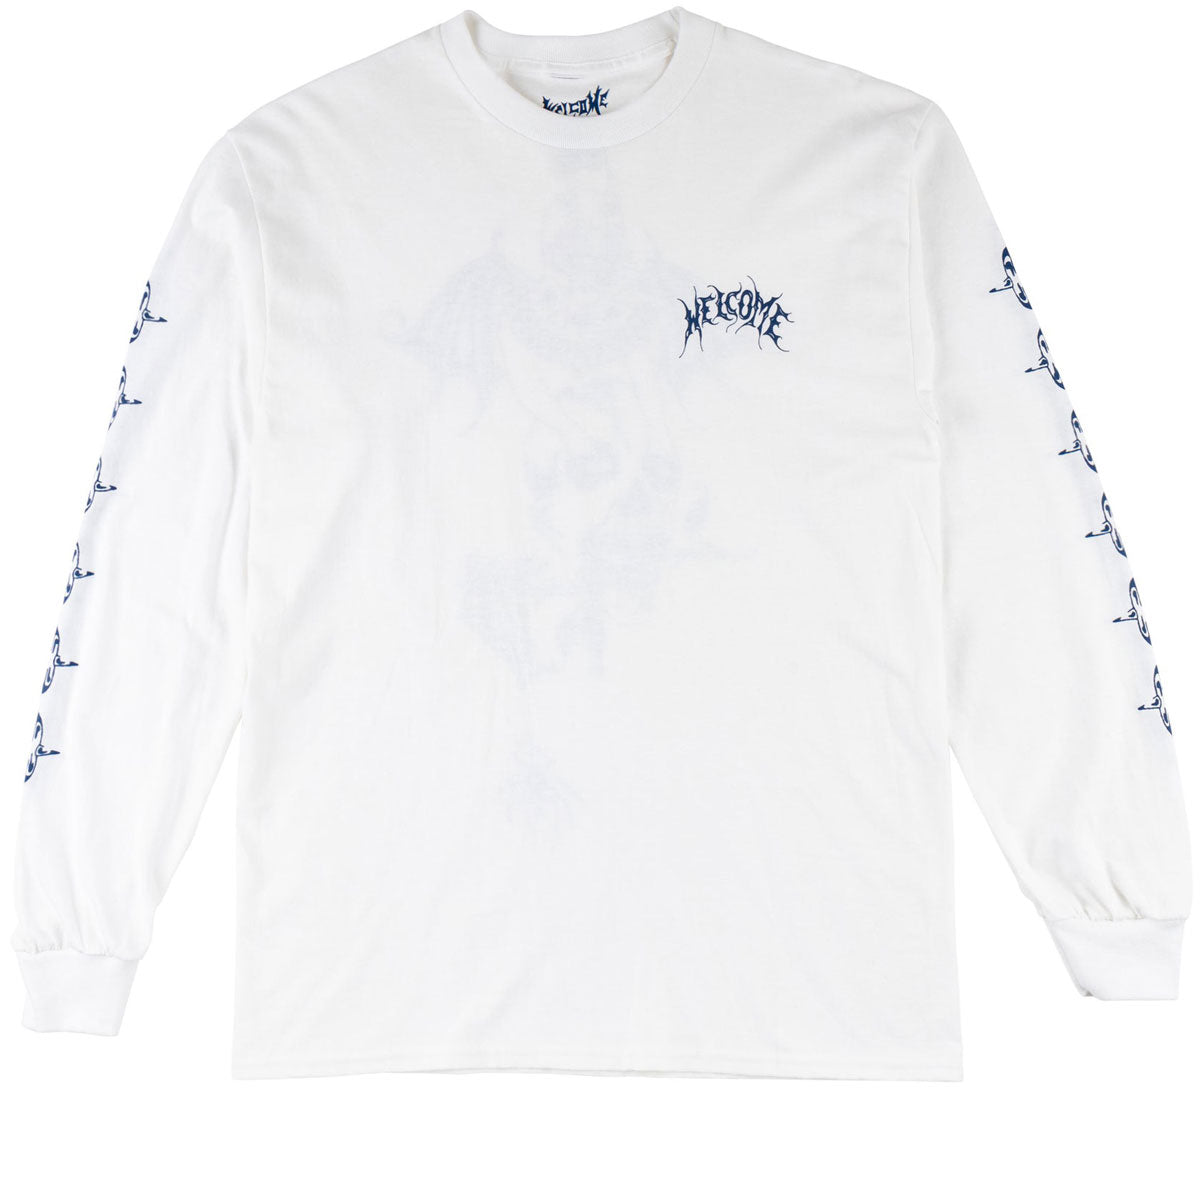 Welcome Angel Long Sleeve T-Shirt - White image 2